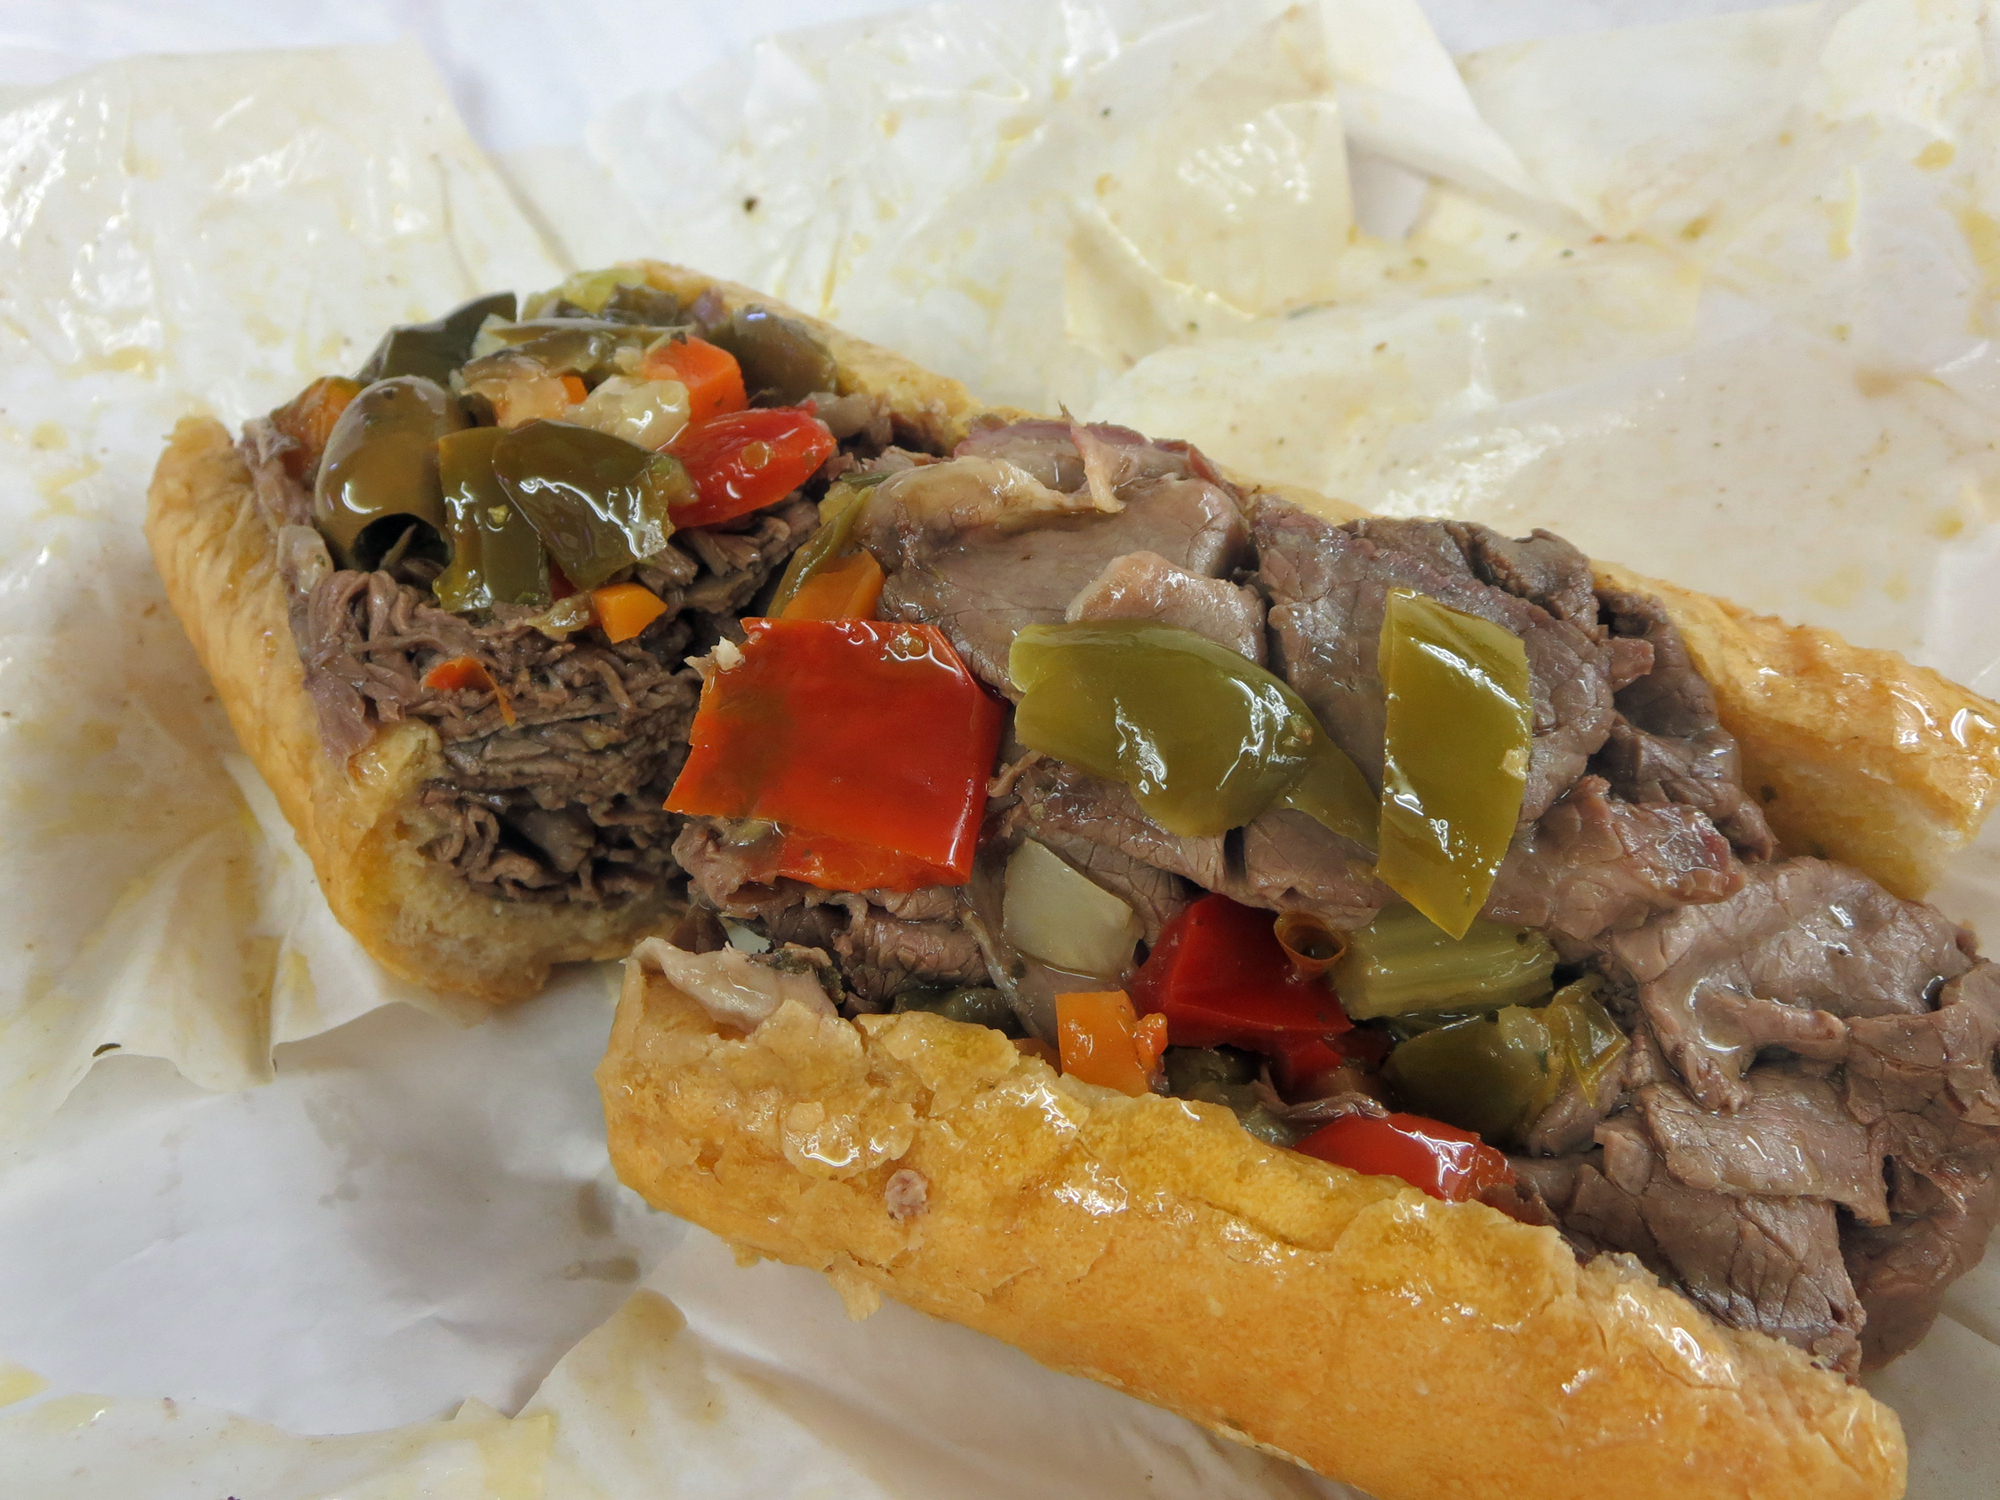 IS CHICAGO’S CLASSIC ITALIAN BEEF AN ENDANGERED SPECIES?